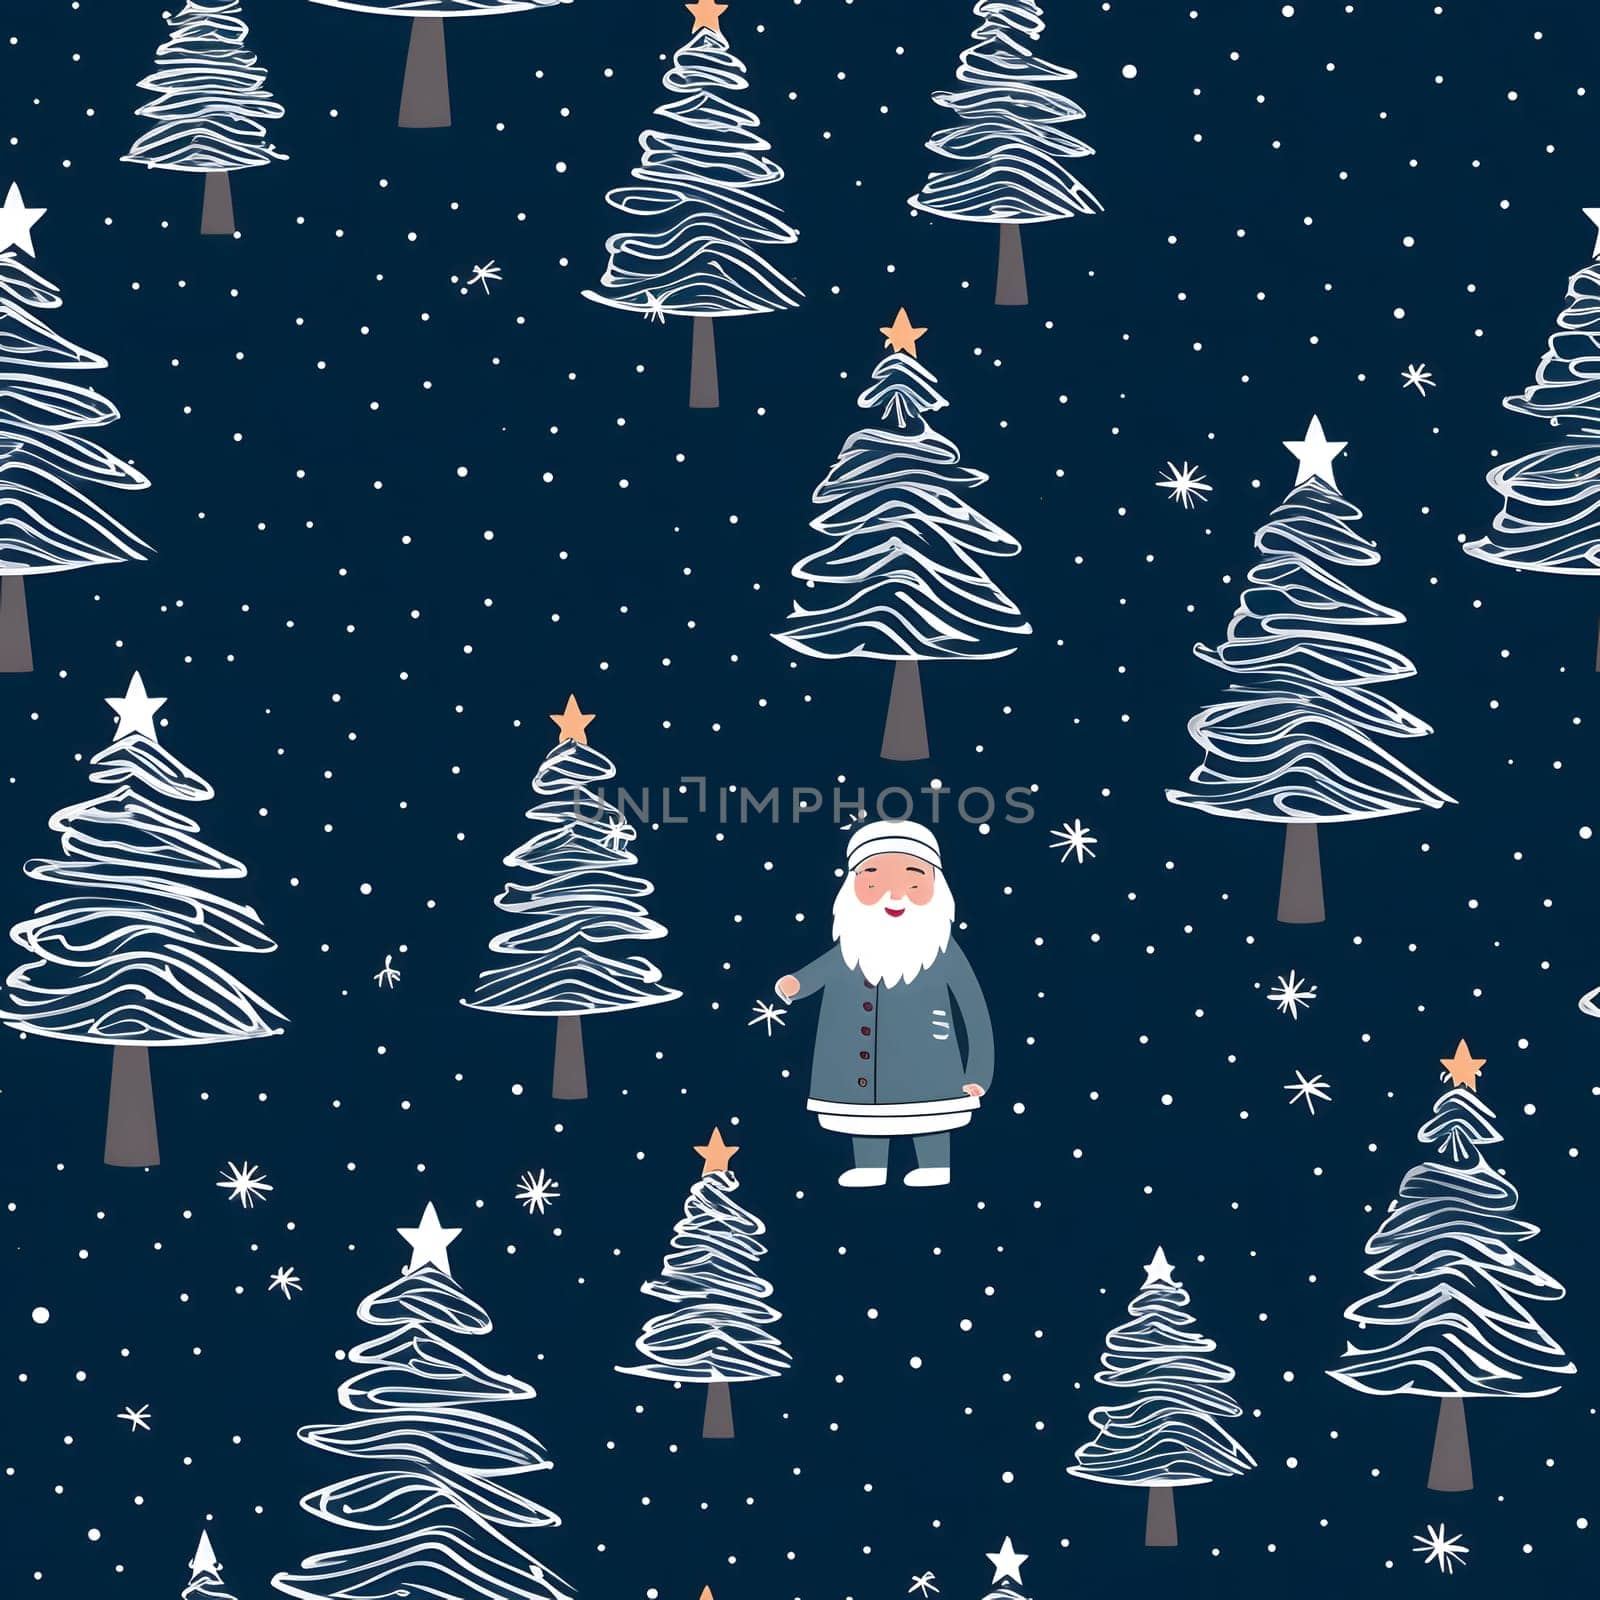 Elegant and modern. Christmas trees and santa claus as abstract background, wallpaper, banner, texture design with pattern - vector. Dark colors.